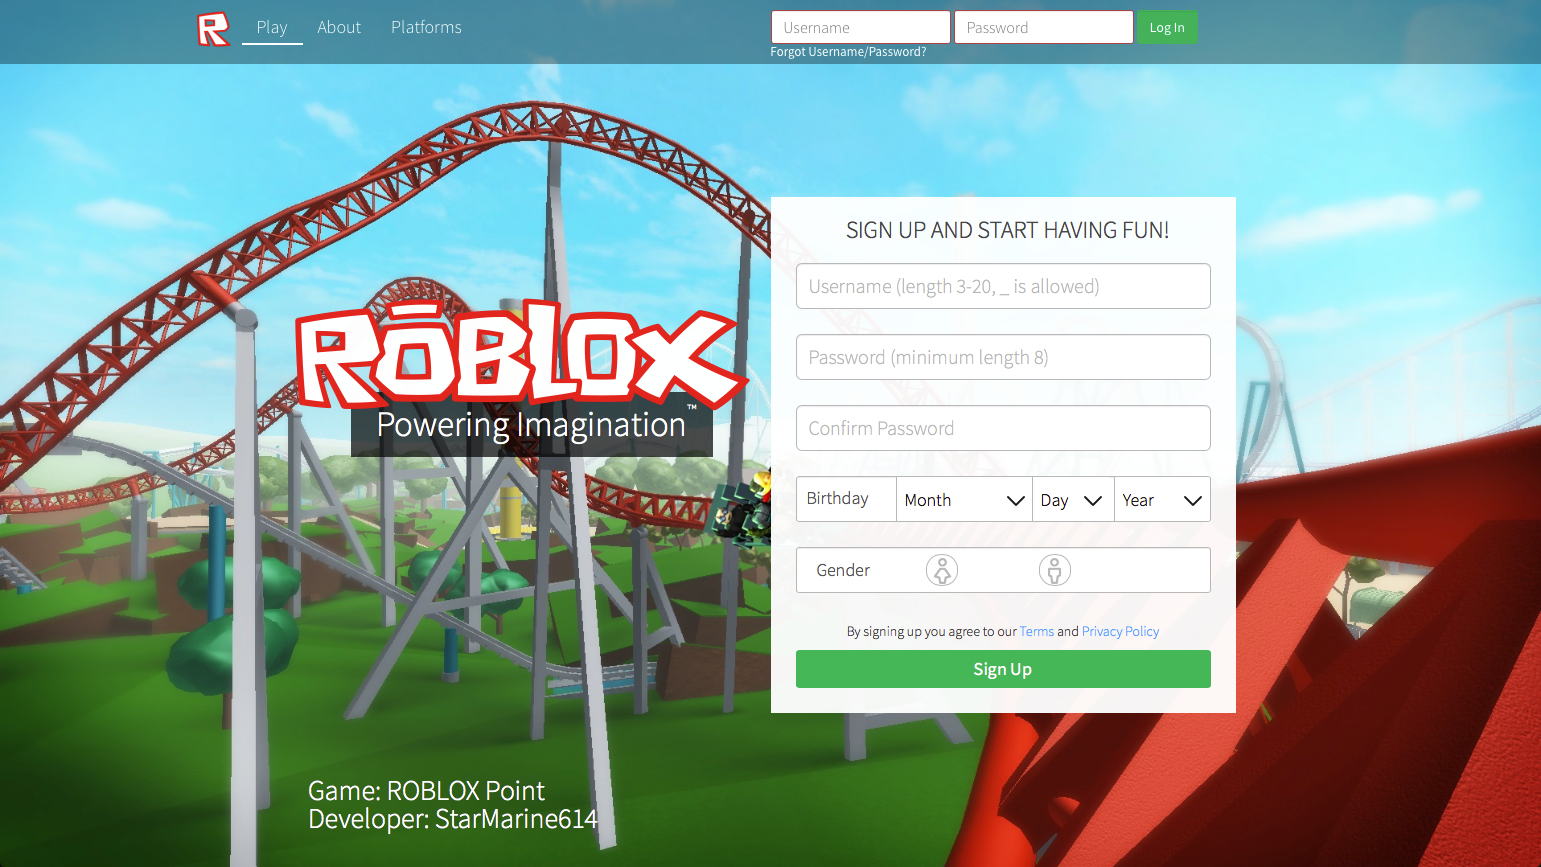 Web Roblox Com Under 13 Player Experience Is Certified By The